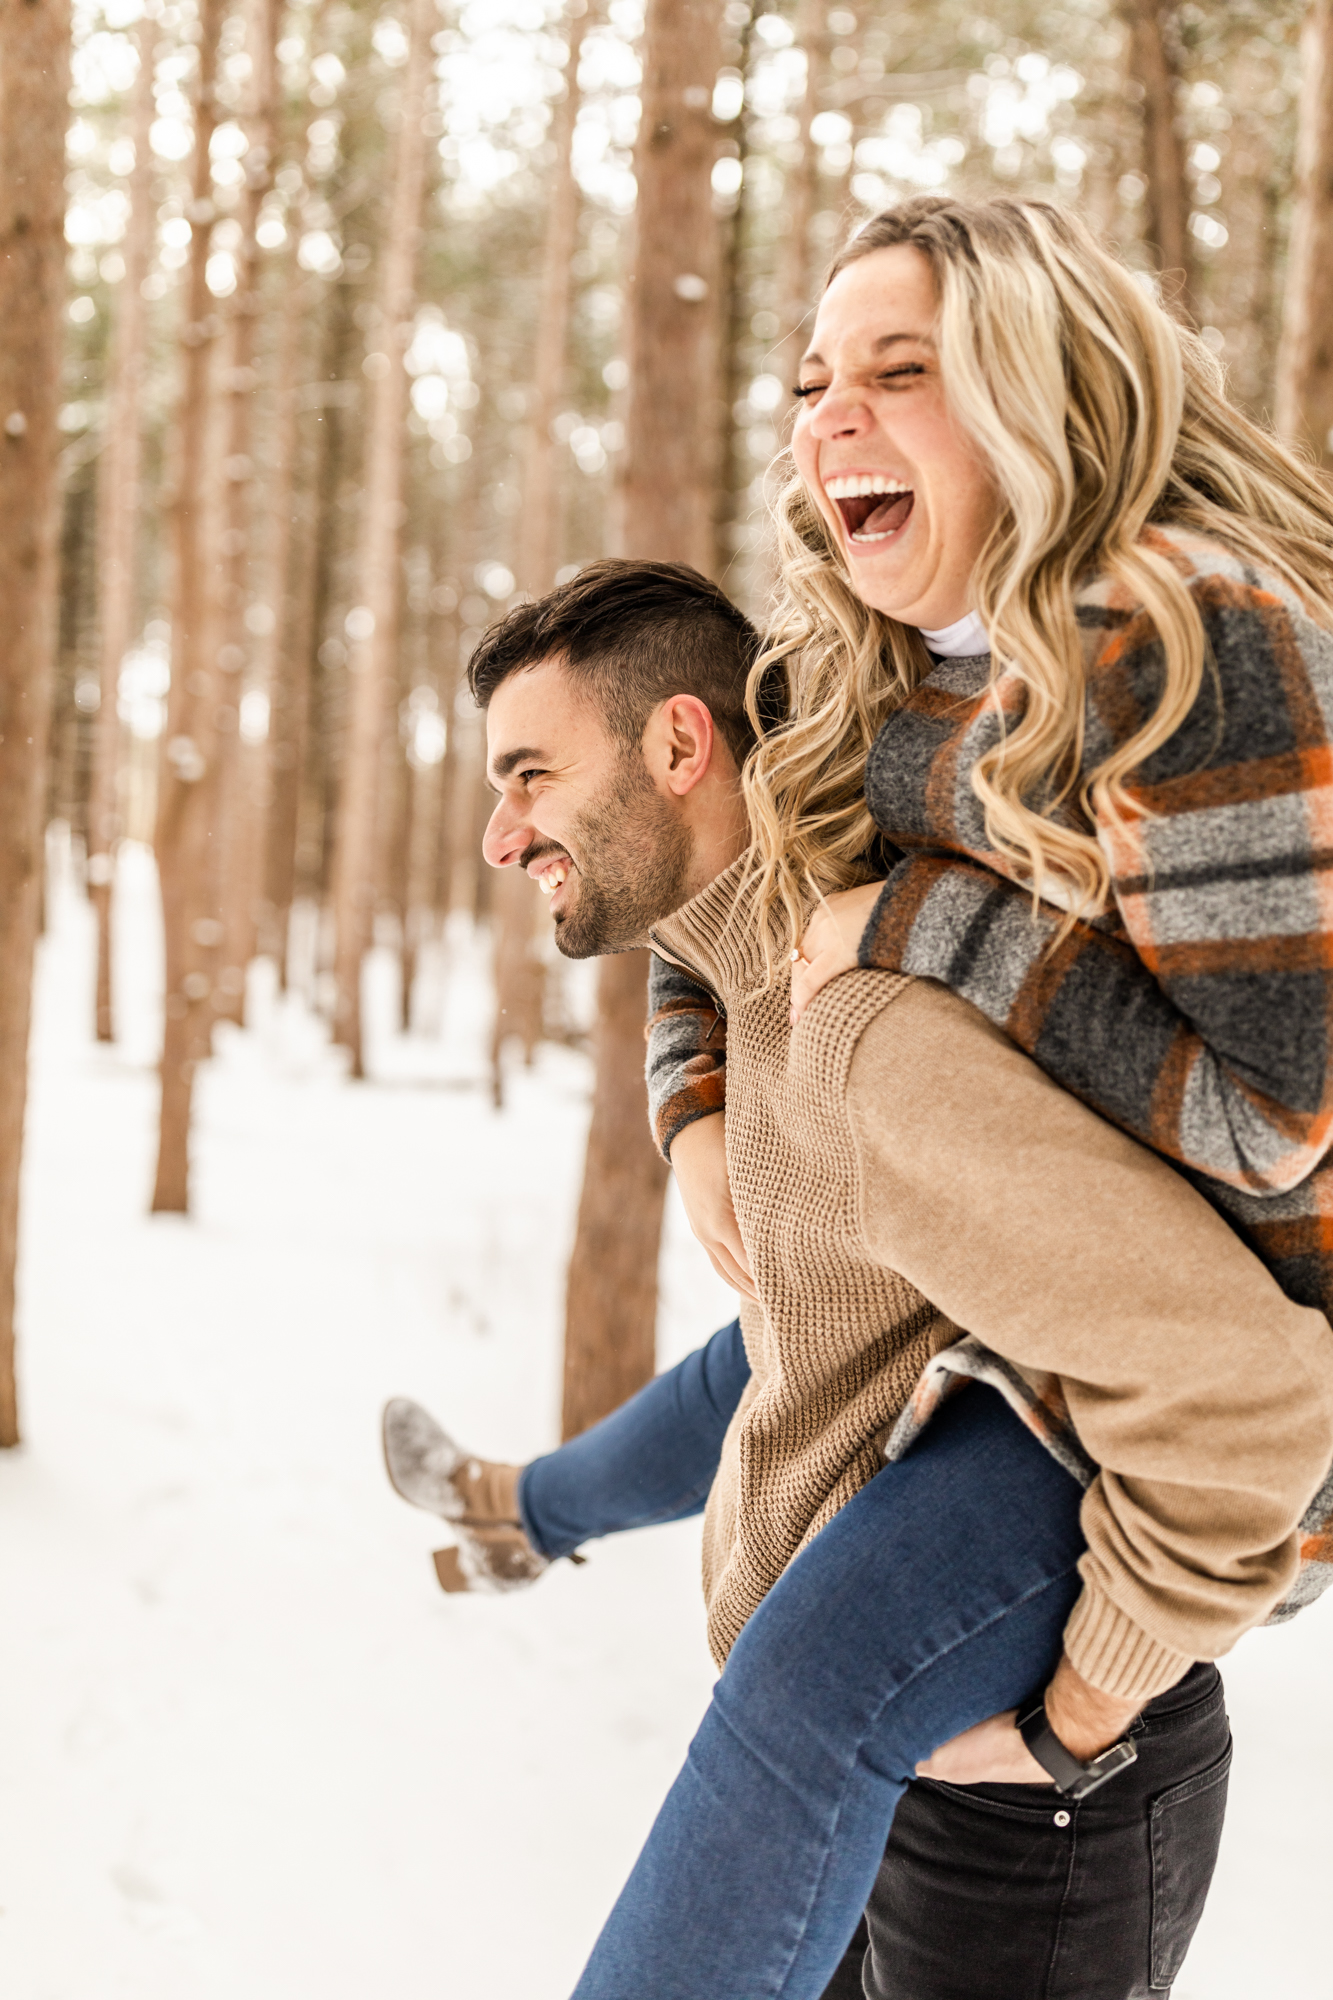 Man carrying woman on his back and laughing in winter snowy engagement photo session